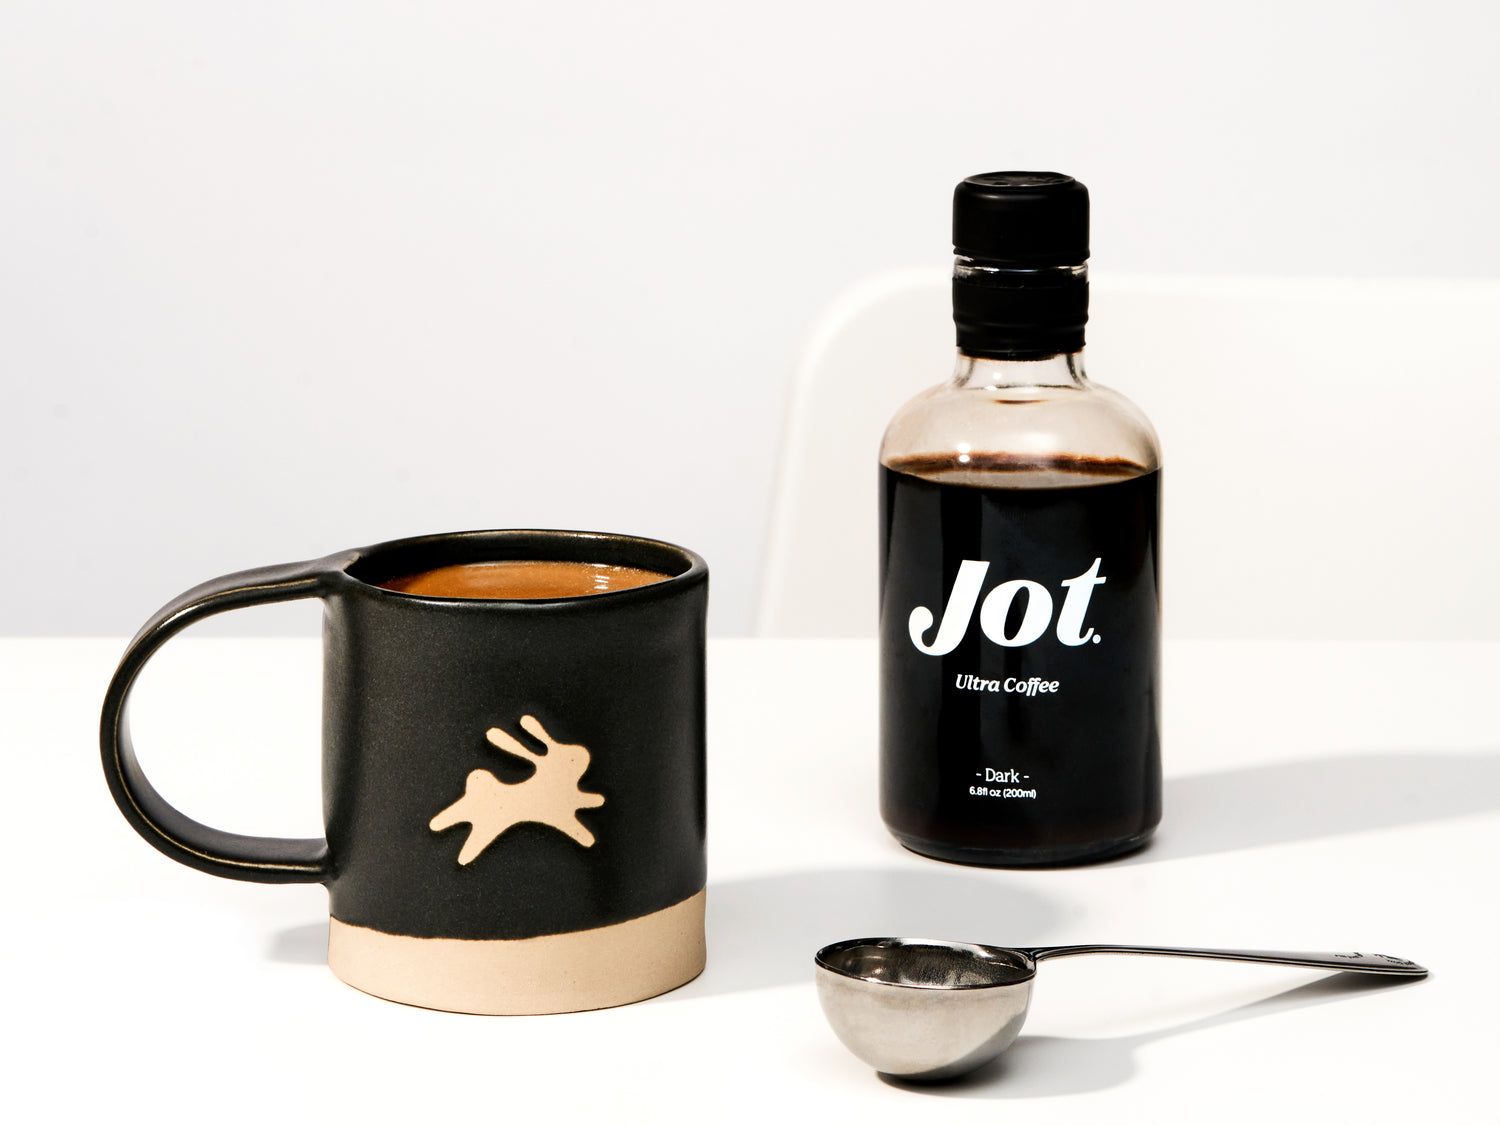 Use Jot Ultra Coffee concentrate for barista-level coffee at home in an instant